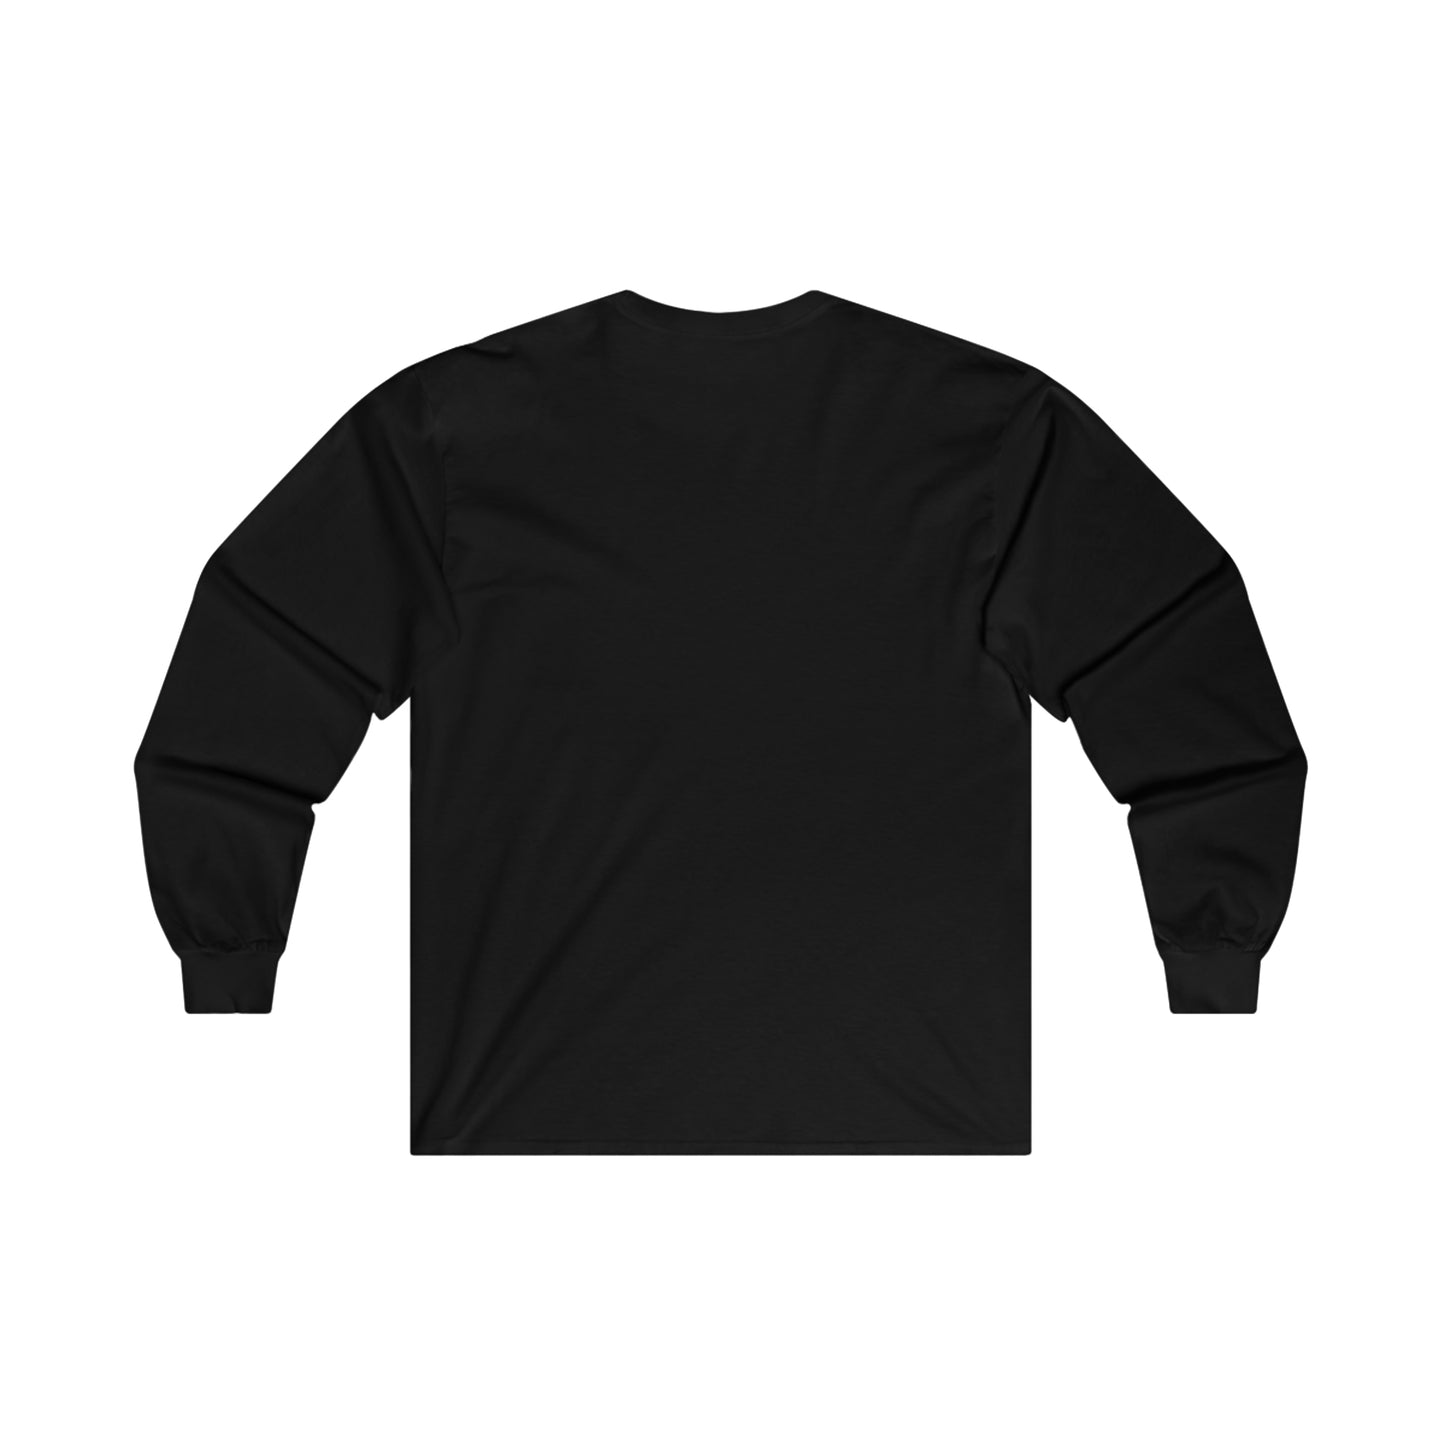 A Gift for The Witchy Member of The Team on Halloween Ultra Cotton Long Sleeve Tee